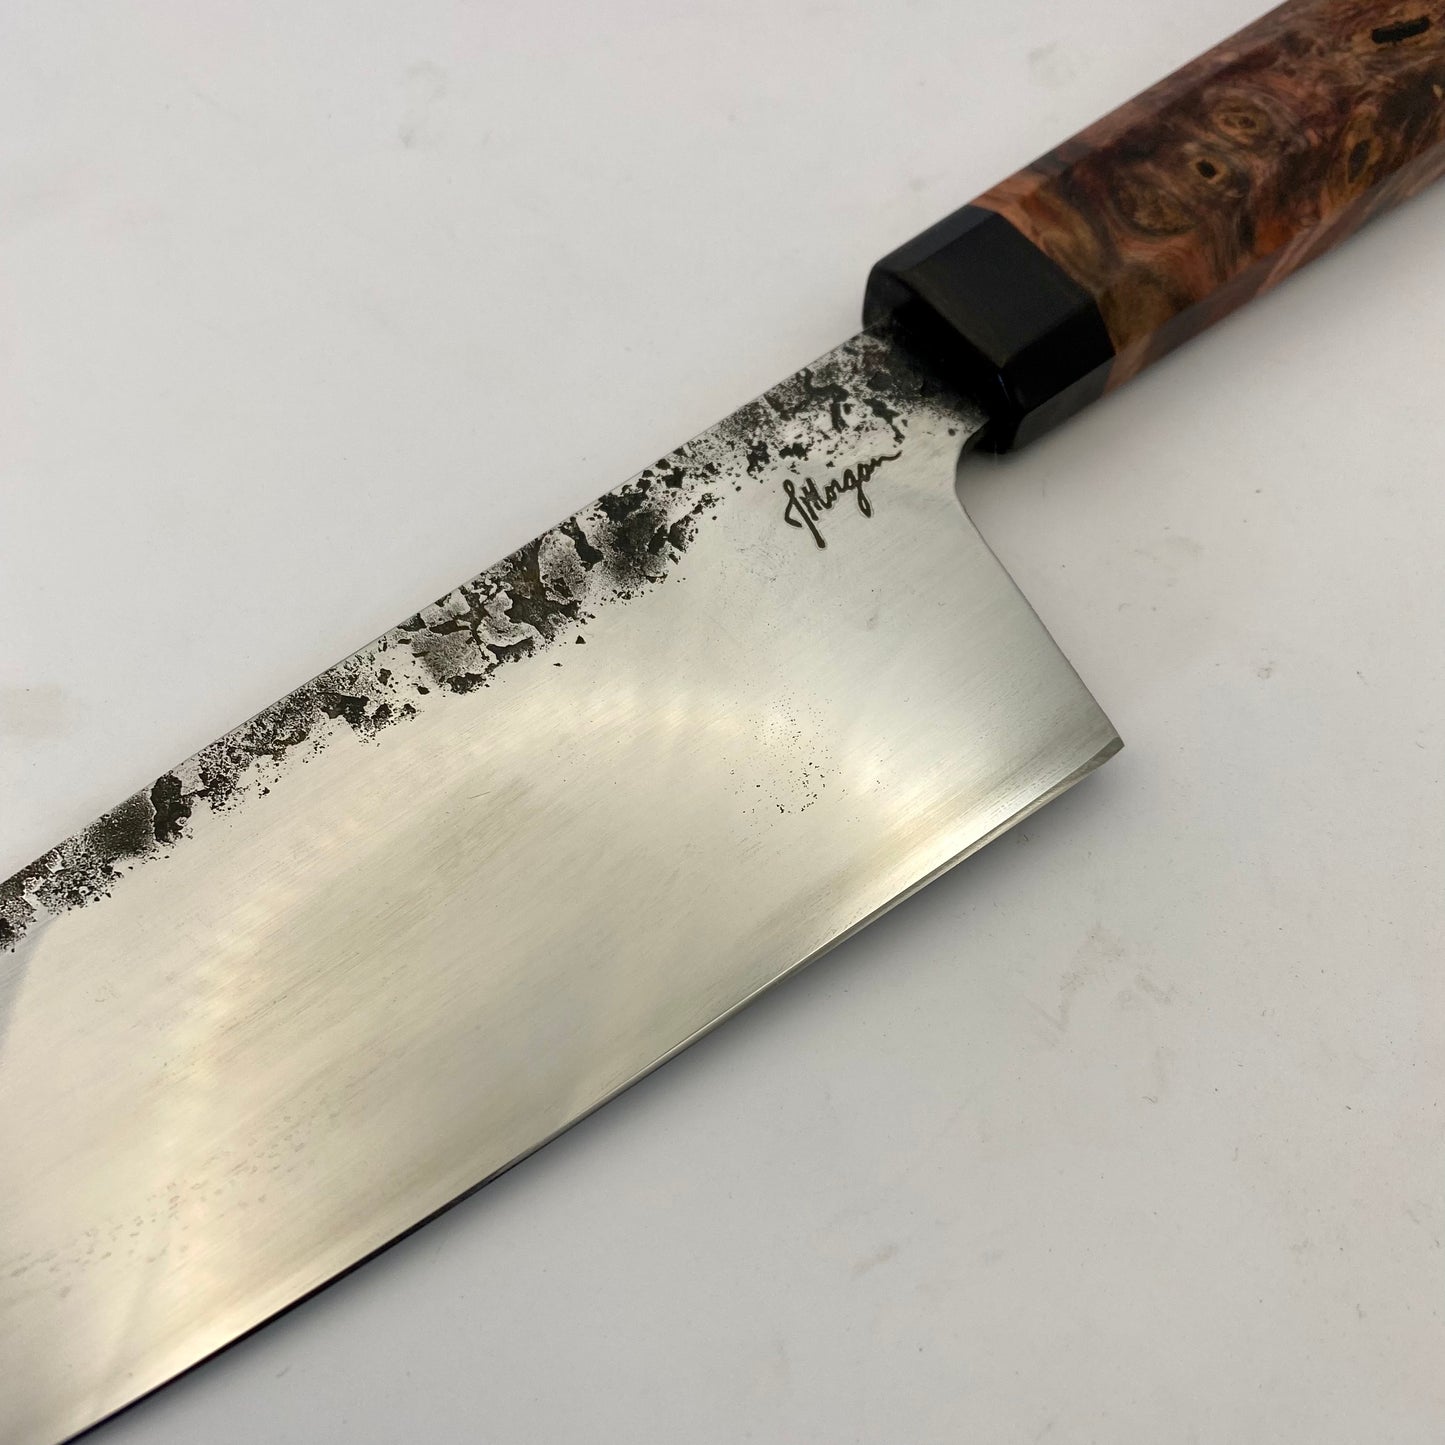 Forged Chef Knife